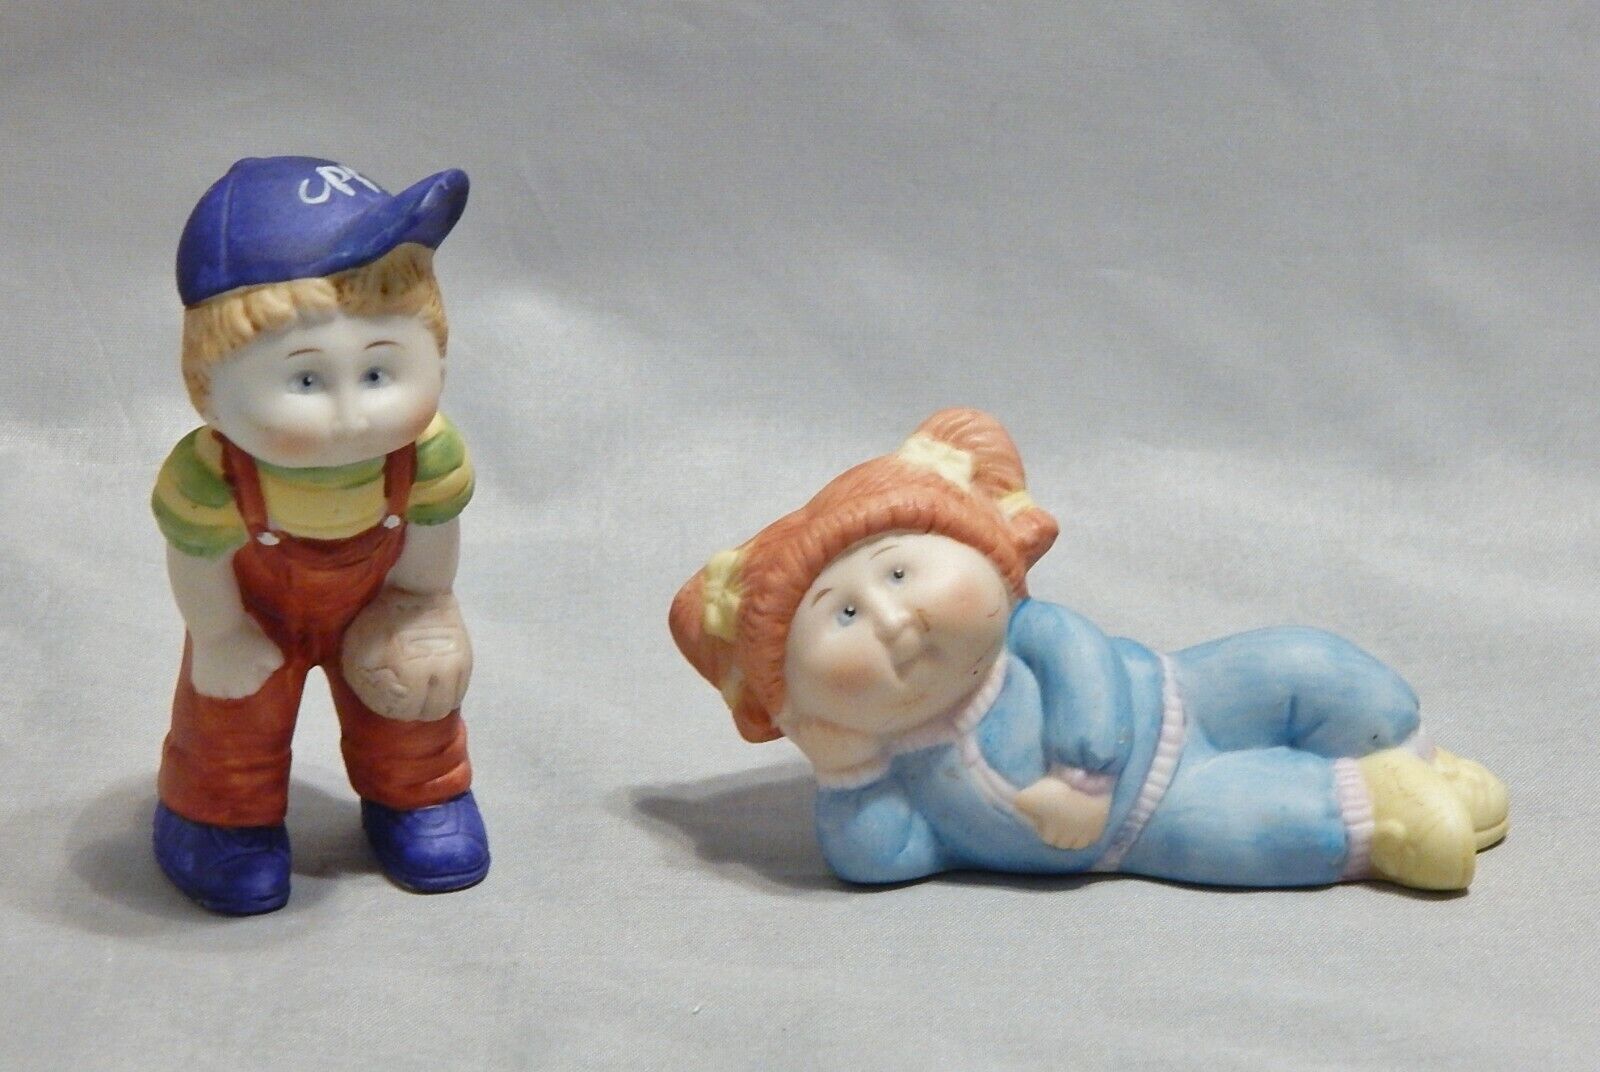 1984 OAA Inc. Cabbage Patch 2 Porcelain Boy and Girl Figurines